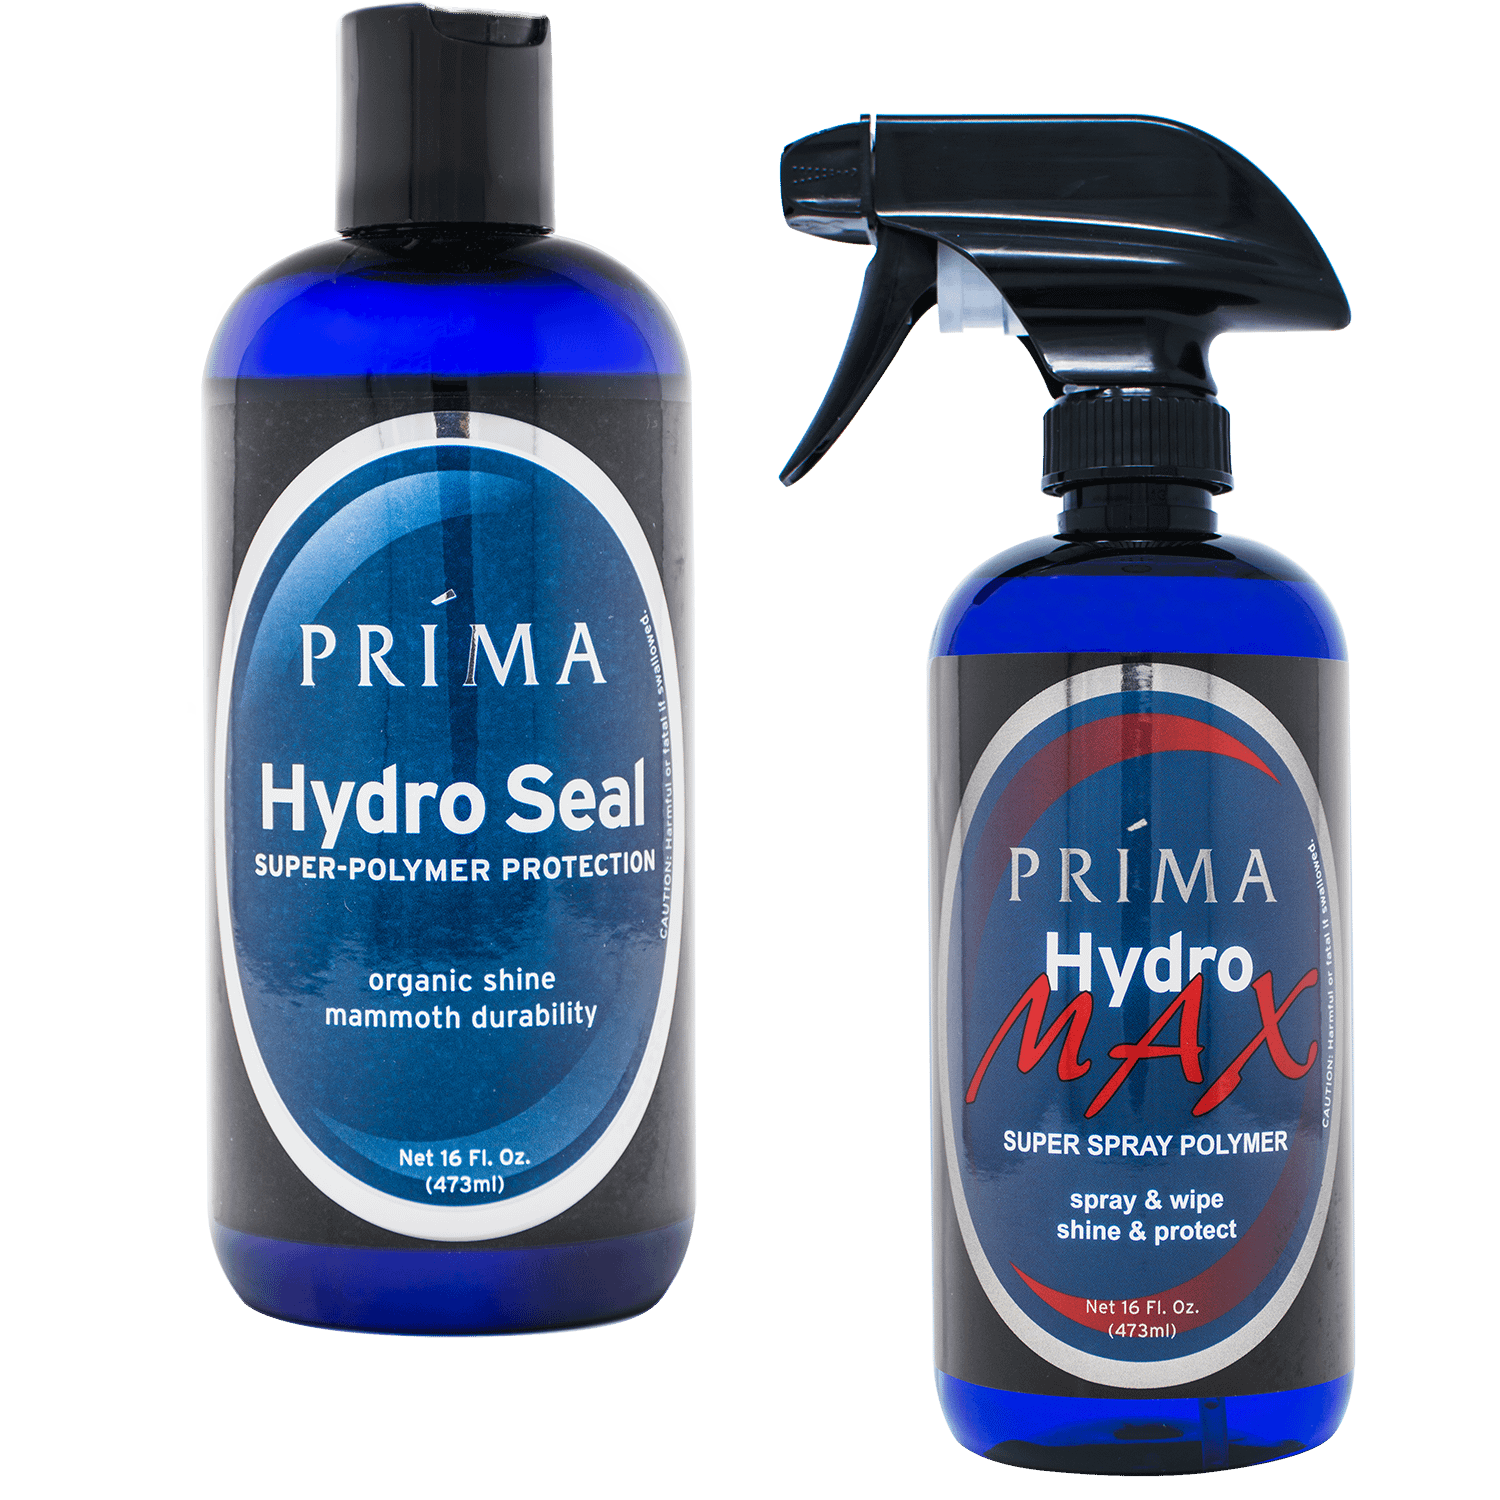 Two bottles of Prima Car Care products are displayed with a blank background